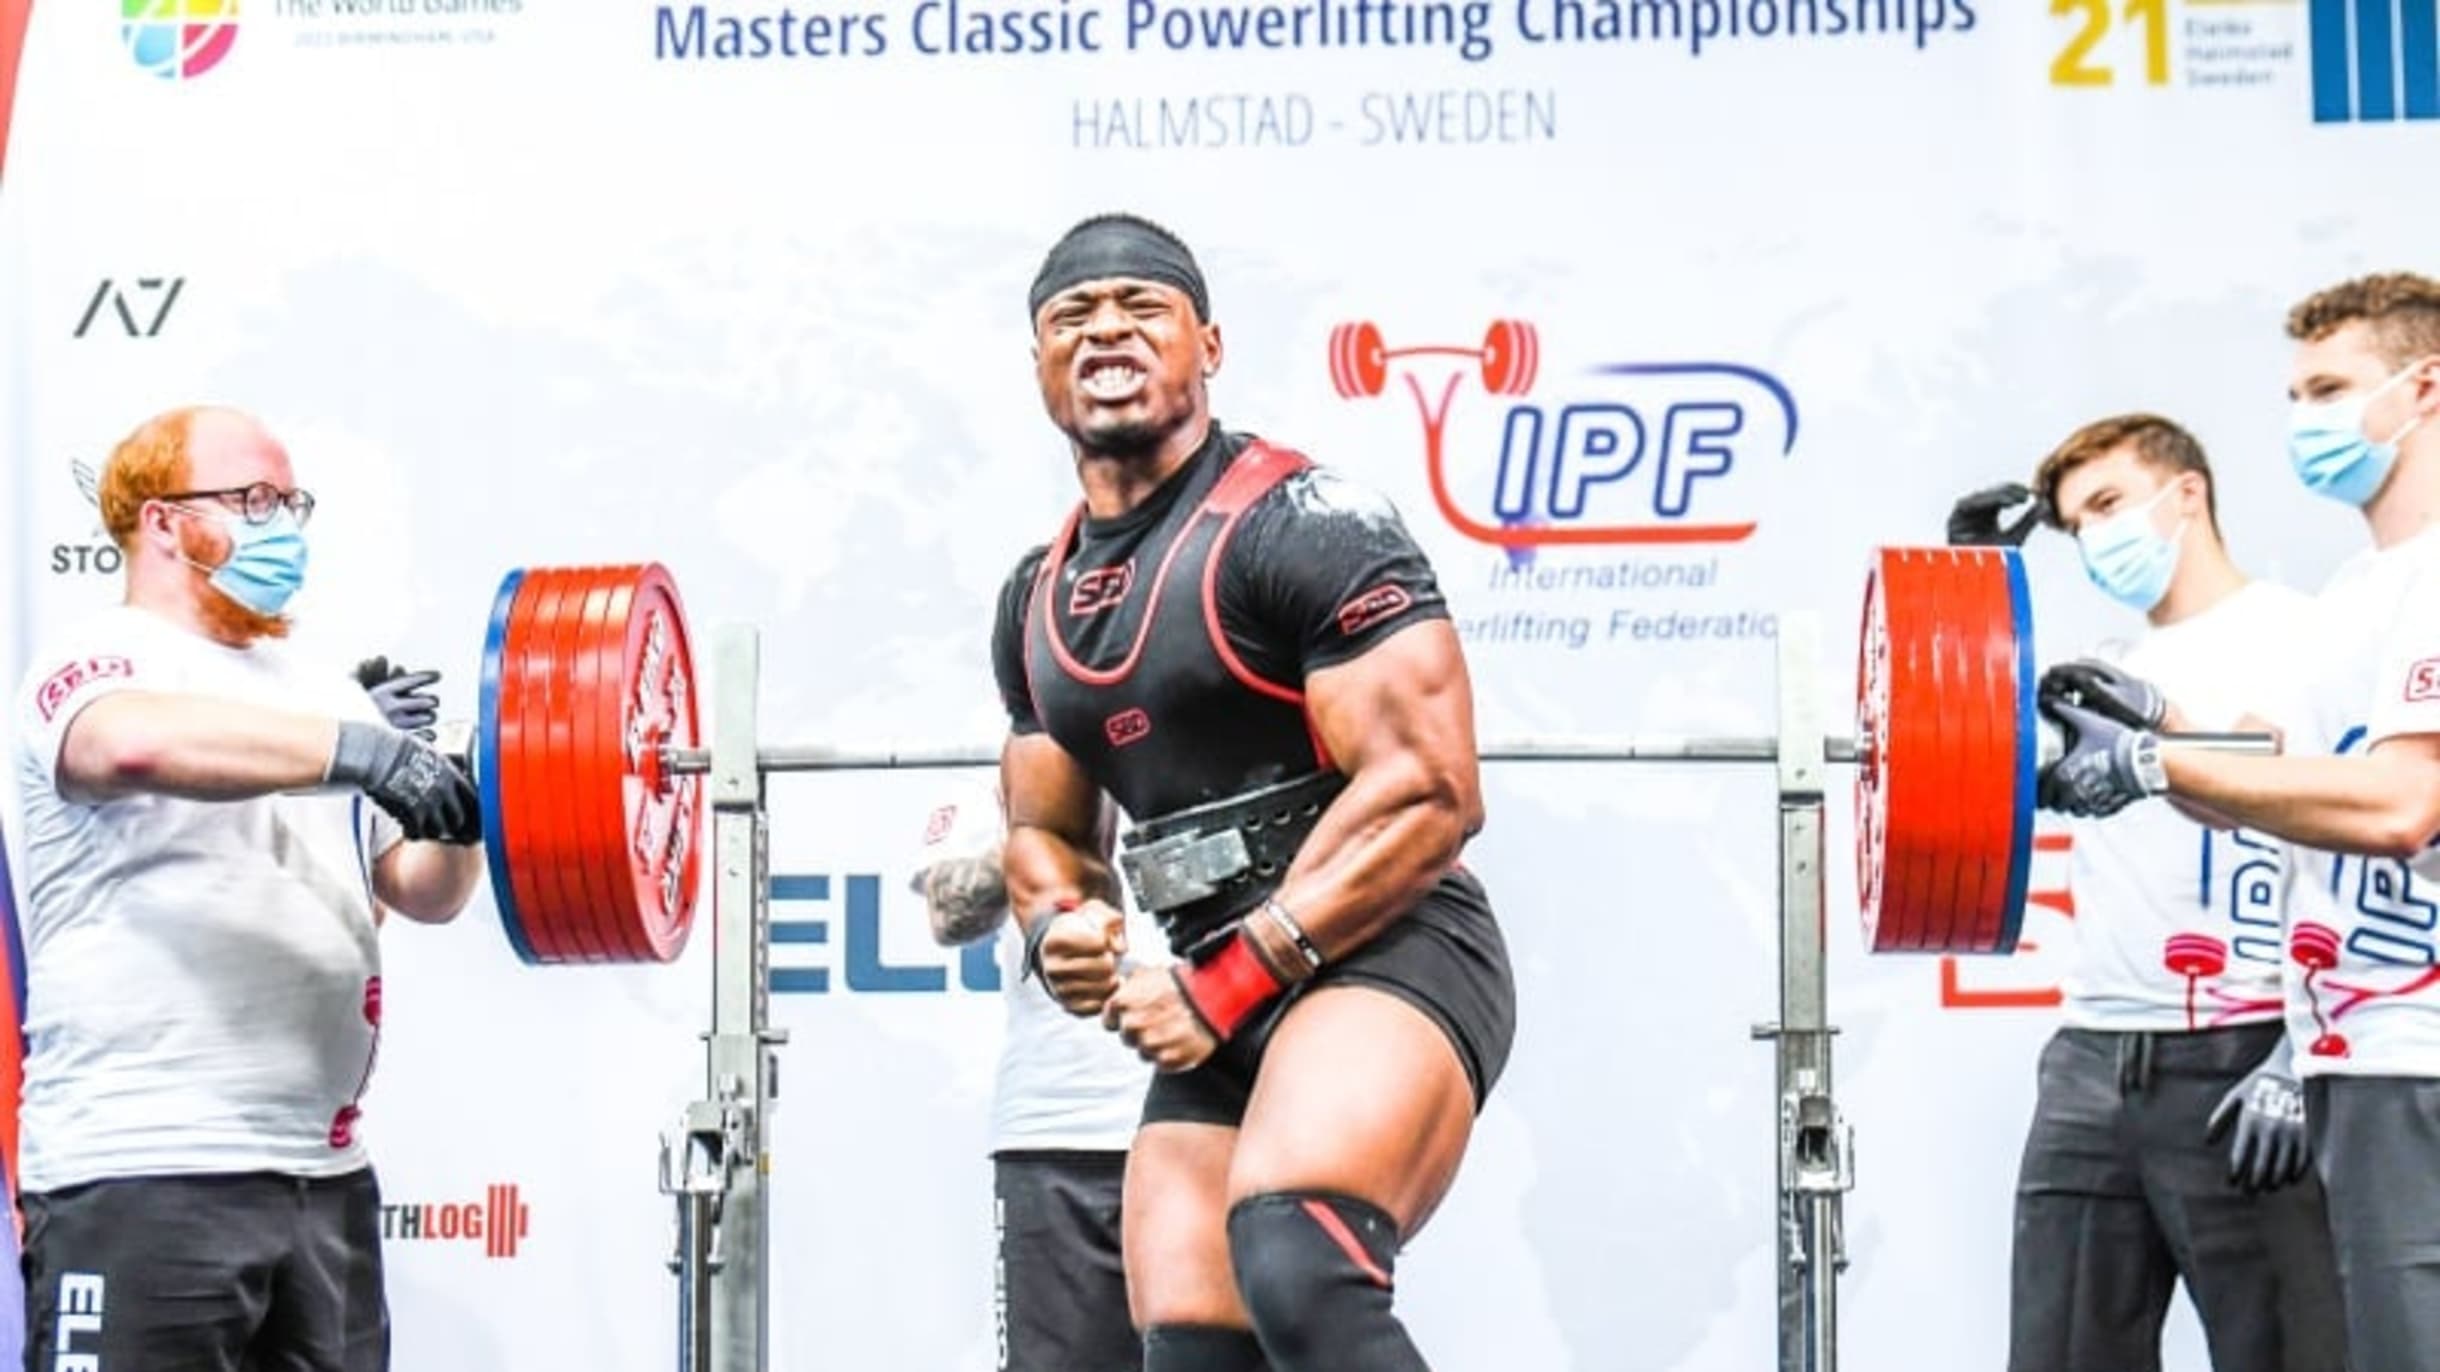 World records tumble at World Open Classic Powerlifting Championships